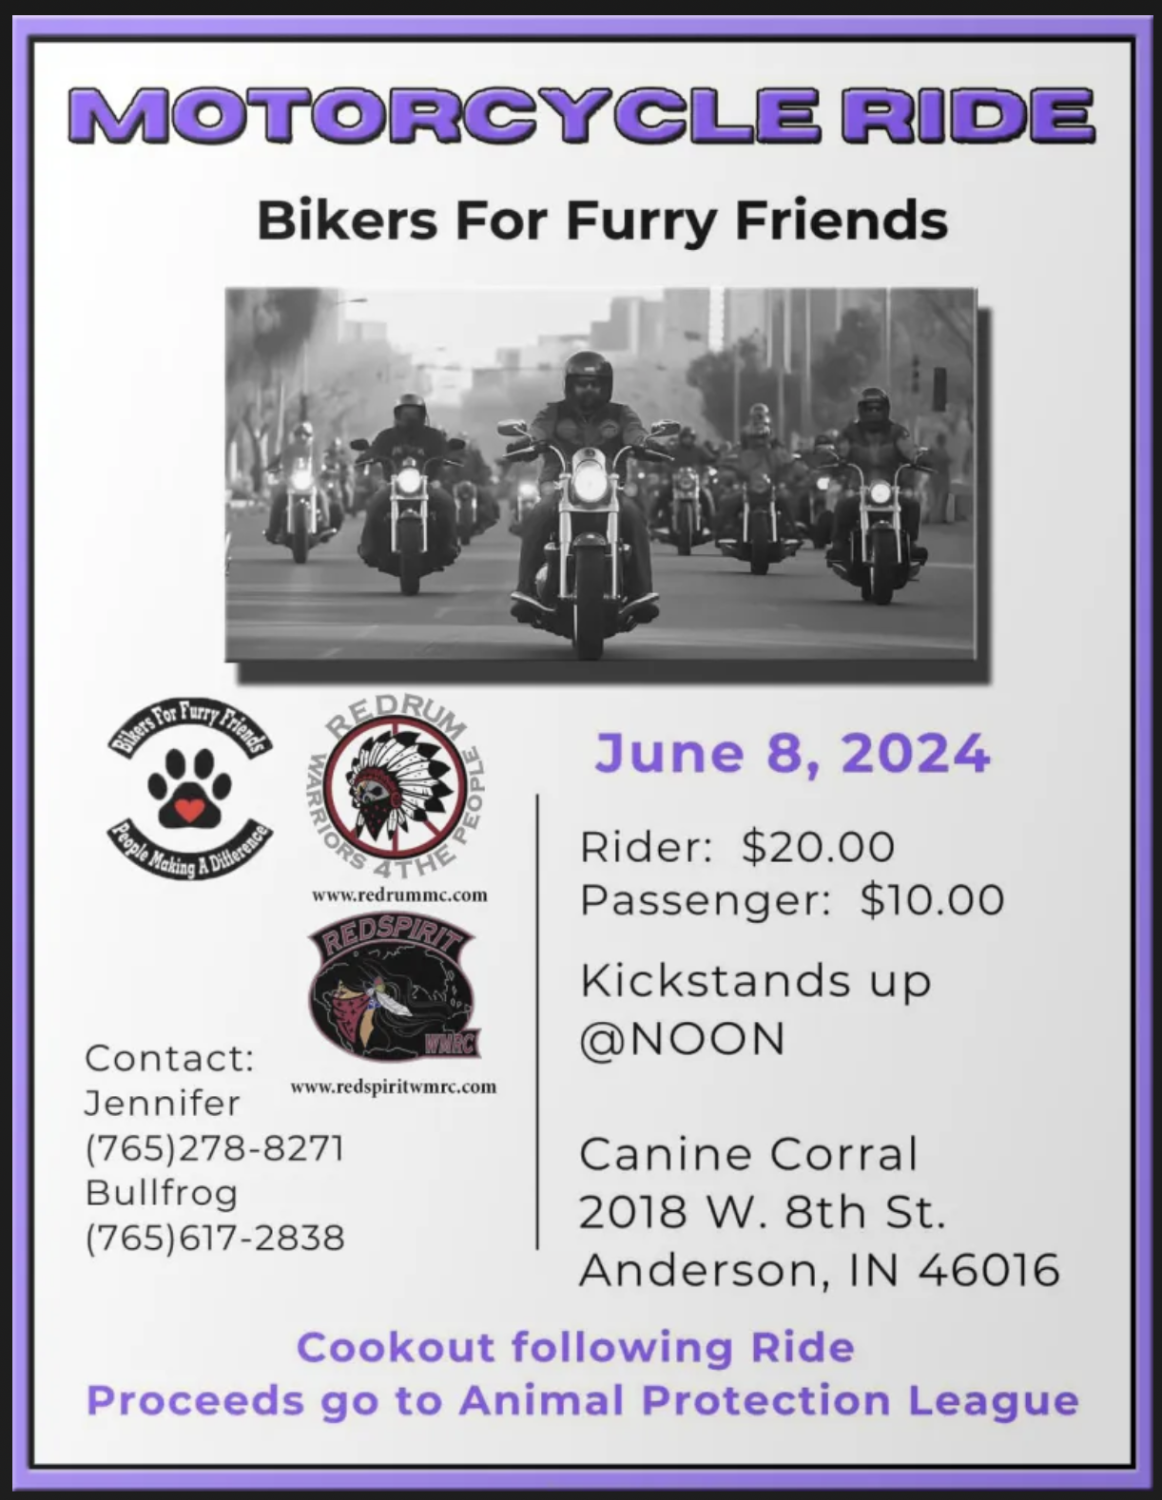 Bikers for Furry Friends Motorcycle Ride